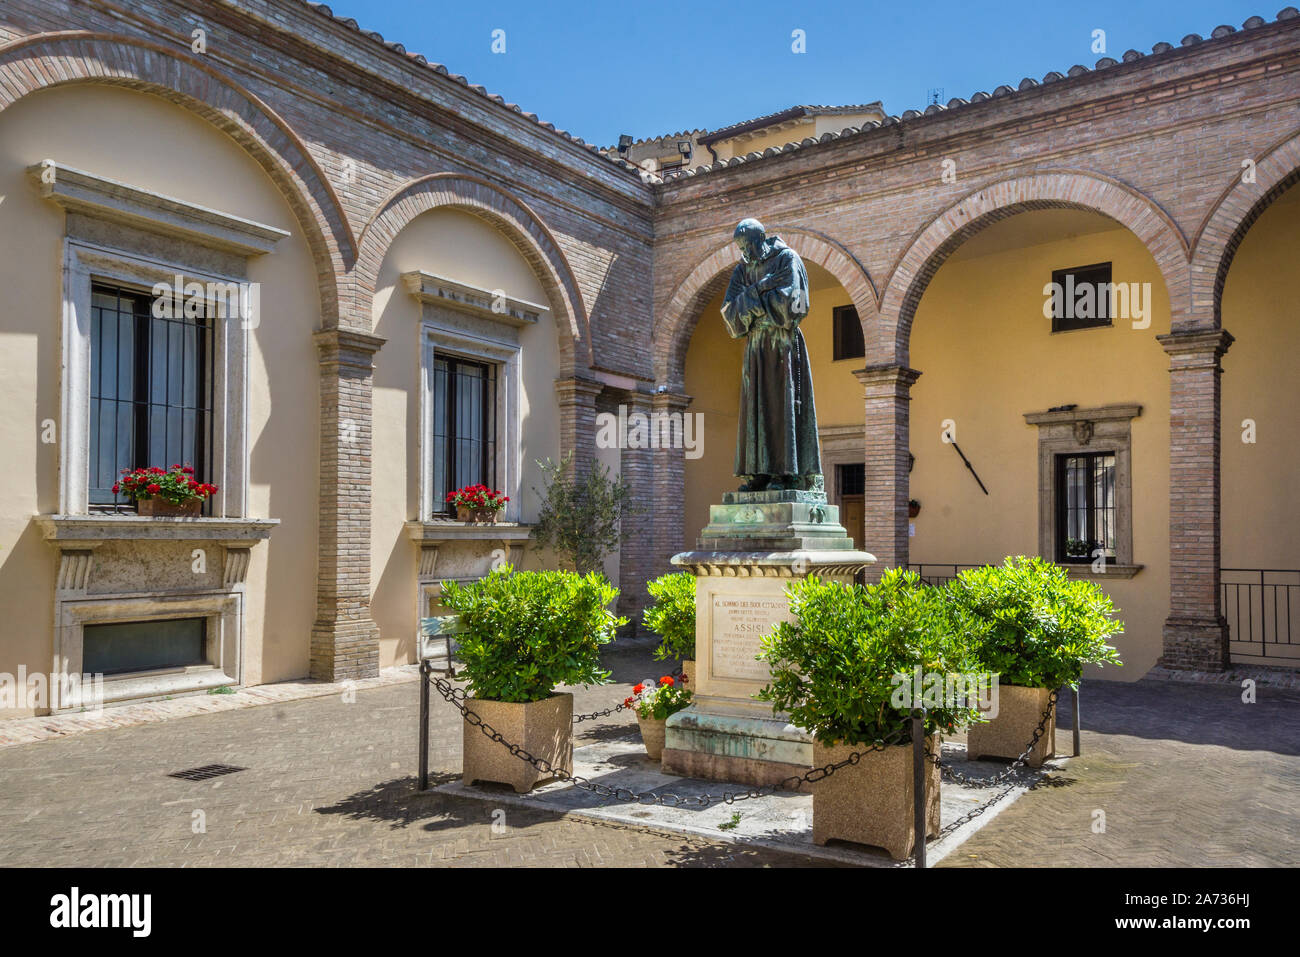 St. Francis of Assisi statue in an annexed courtyard of the Santa Maria Maggiore church, Assisi, Umbria, Italy Stock Photo